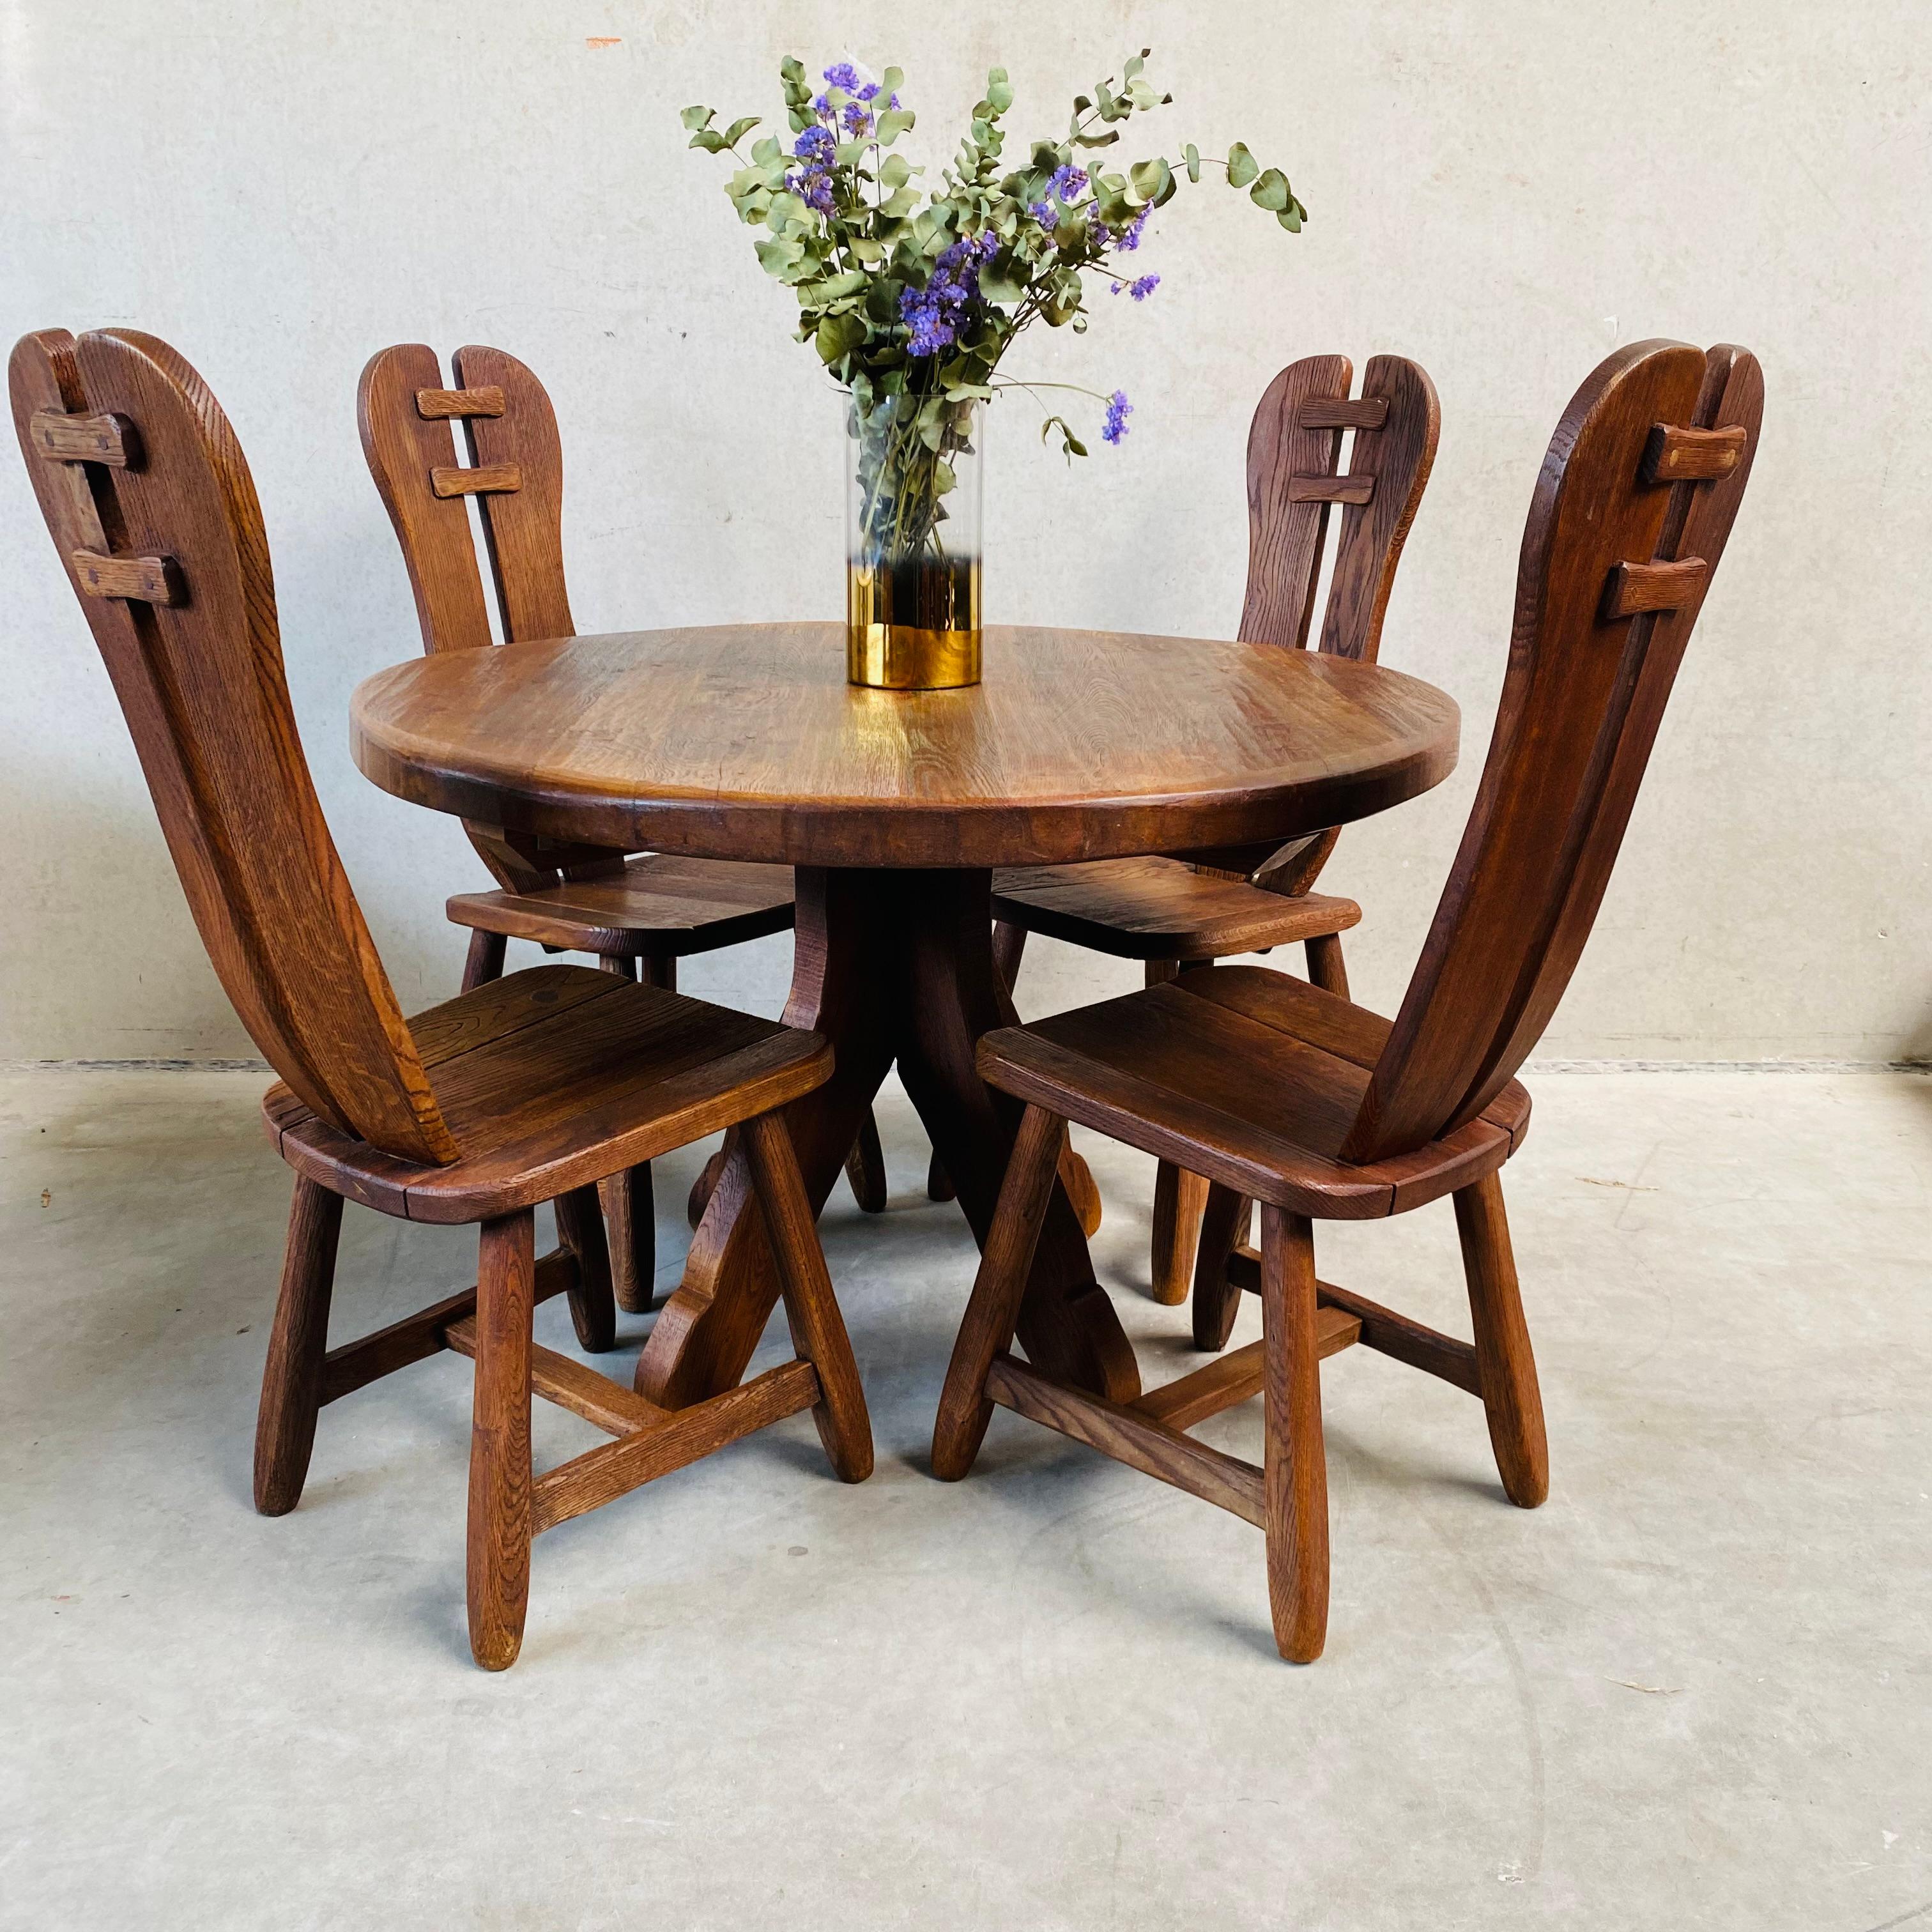 Brutalist Solid Oak Art Dining Chairs by 